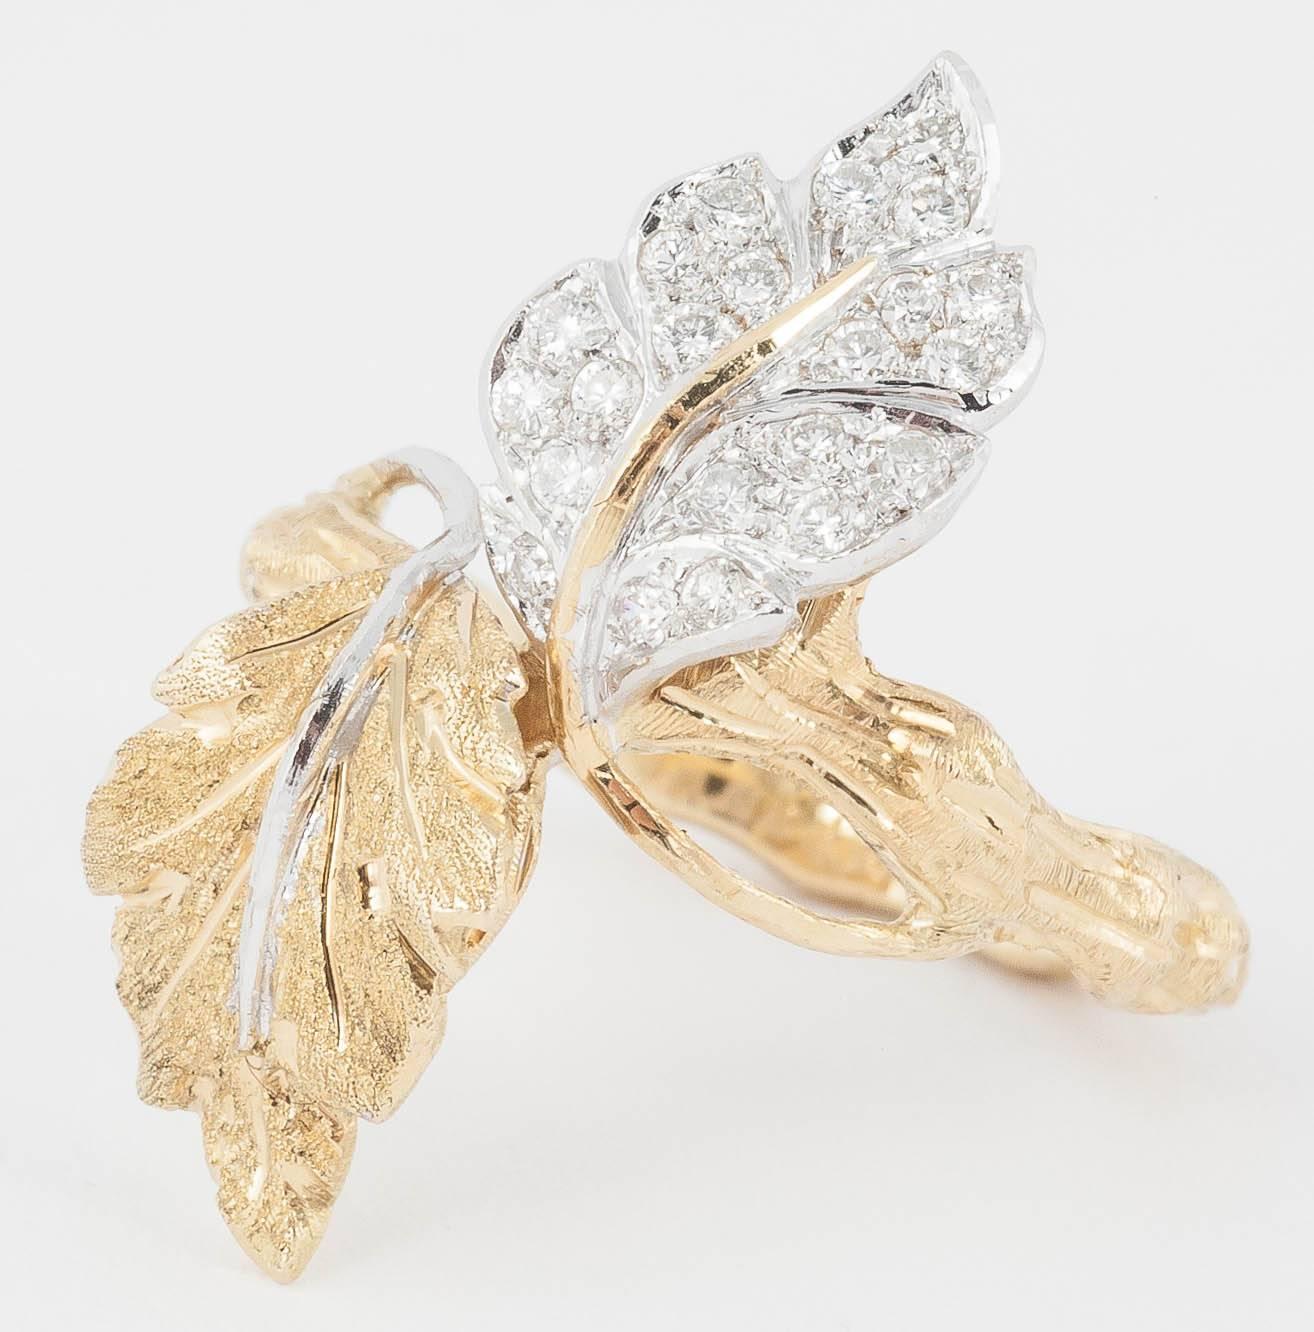 Very pretty dress ring by M Buccellati . The ring is in 18ct 2 colour gold and is set with Diamonds
Ring size M 1/2